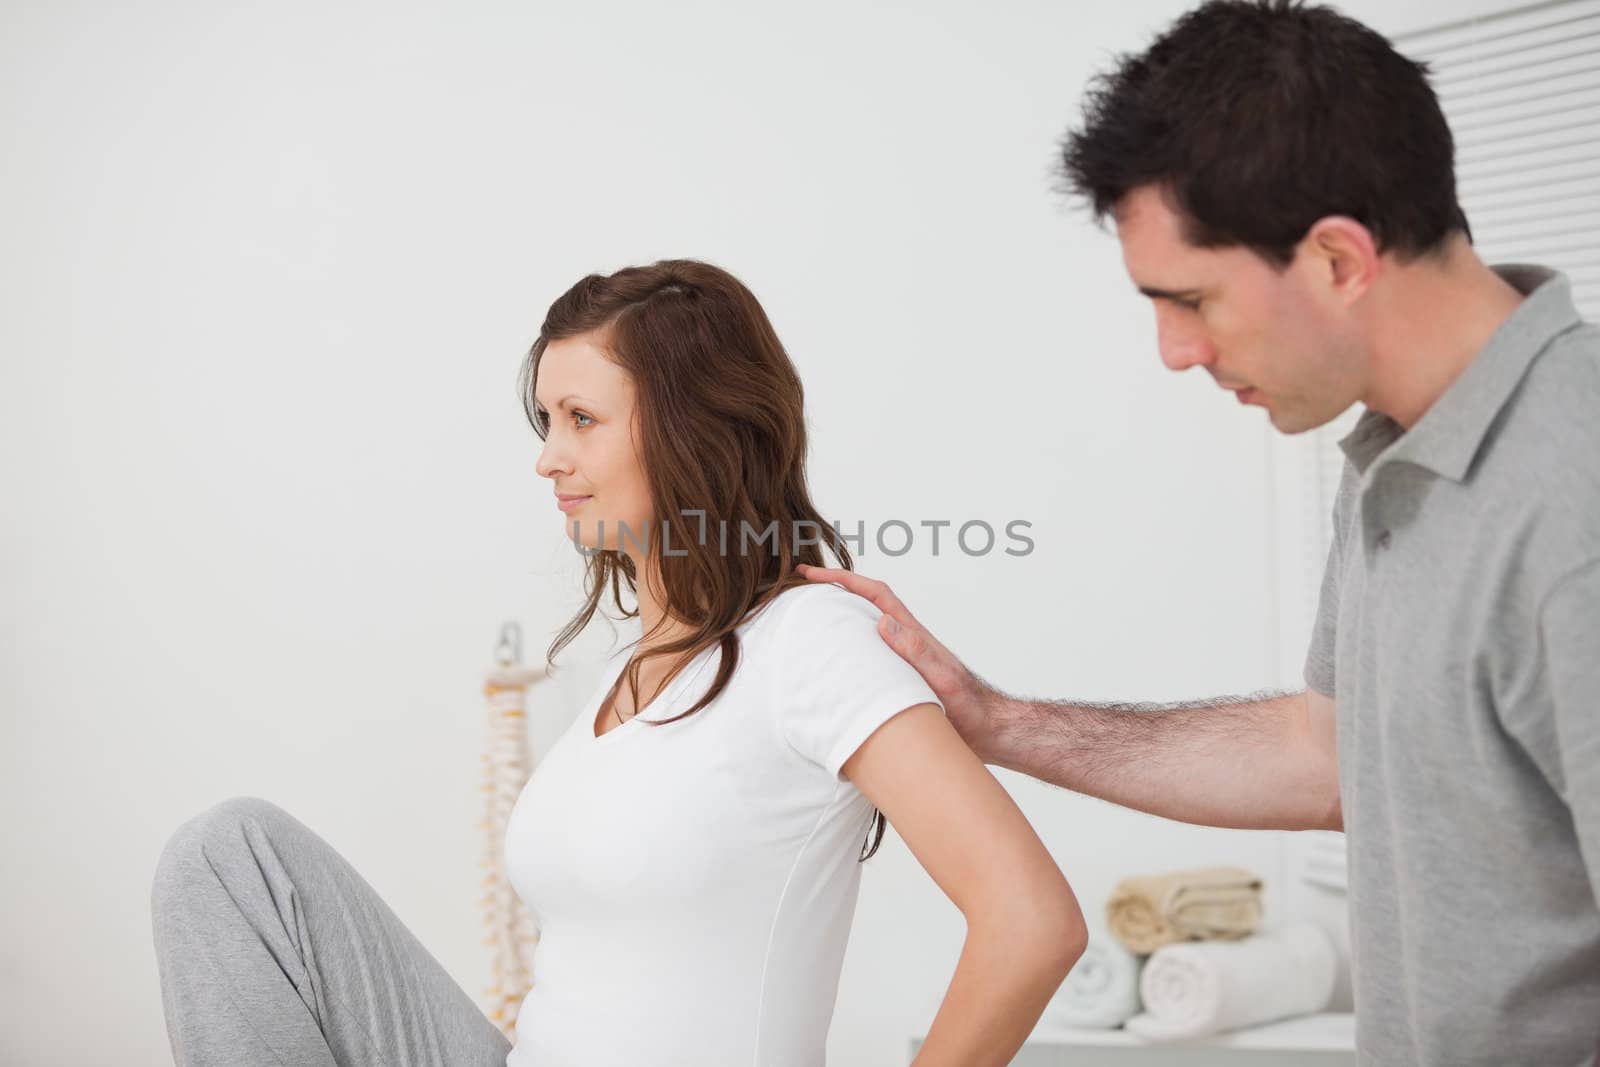 Woman sitting while a man is touching her back in a room